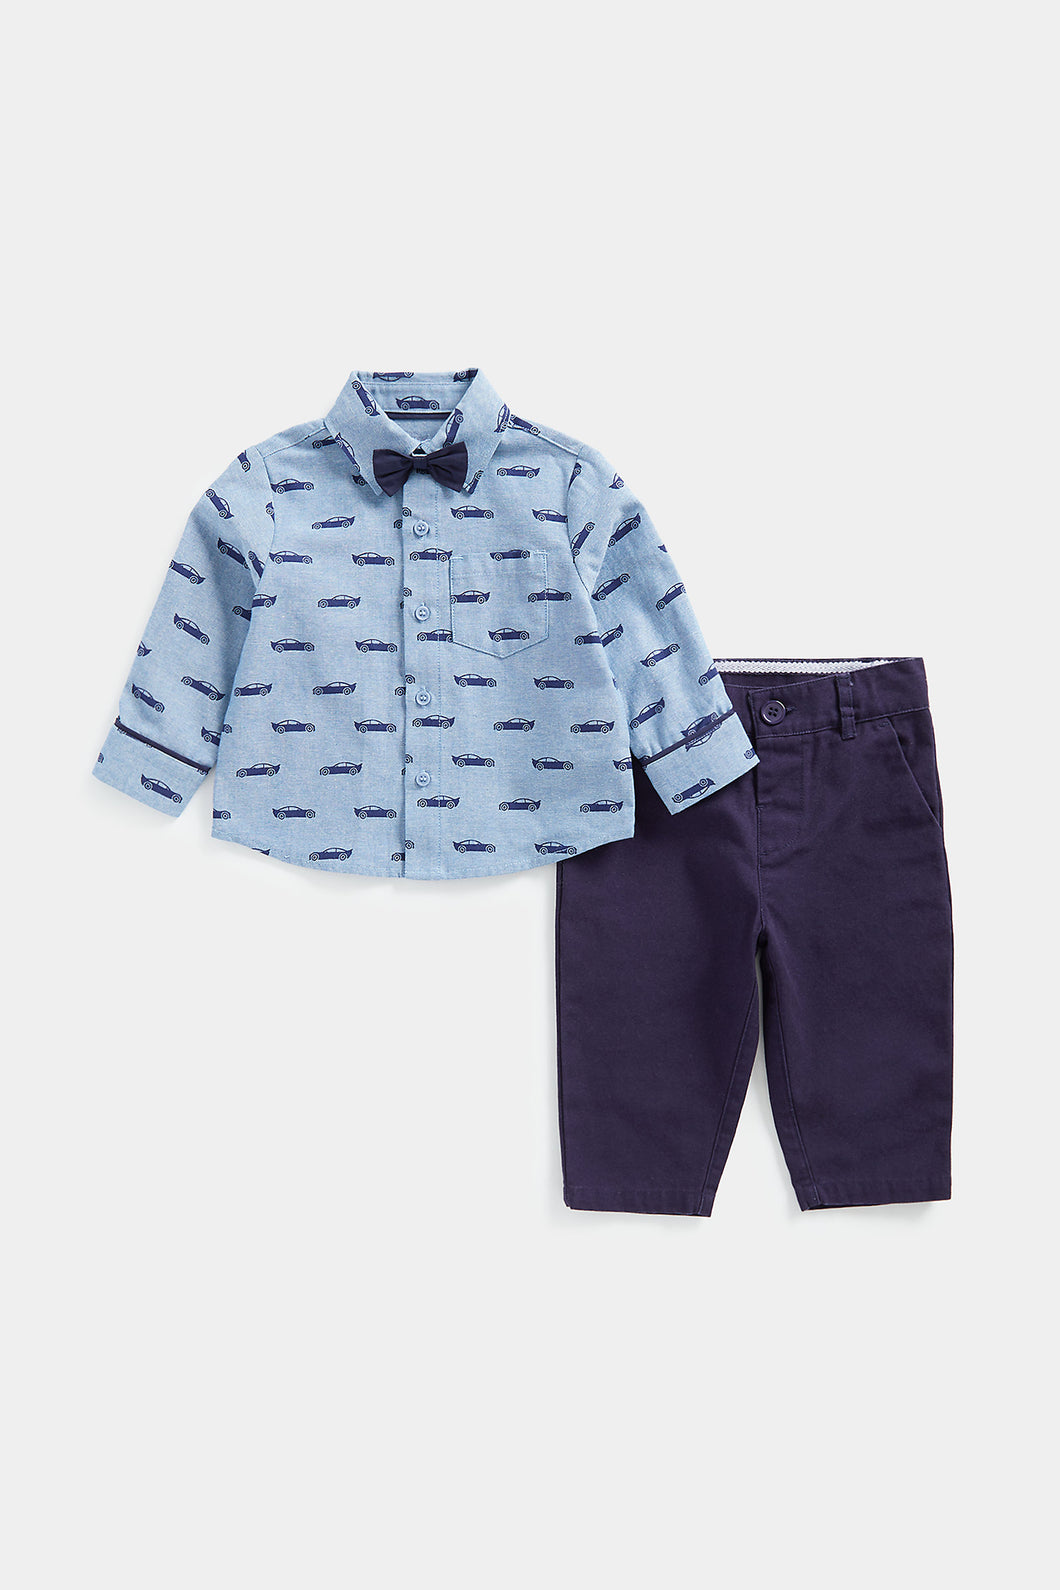 Mothercare Car Shirt, Trousers and Bow Tie Set